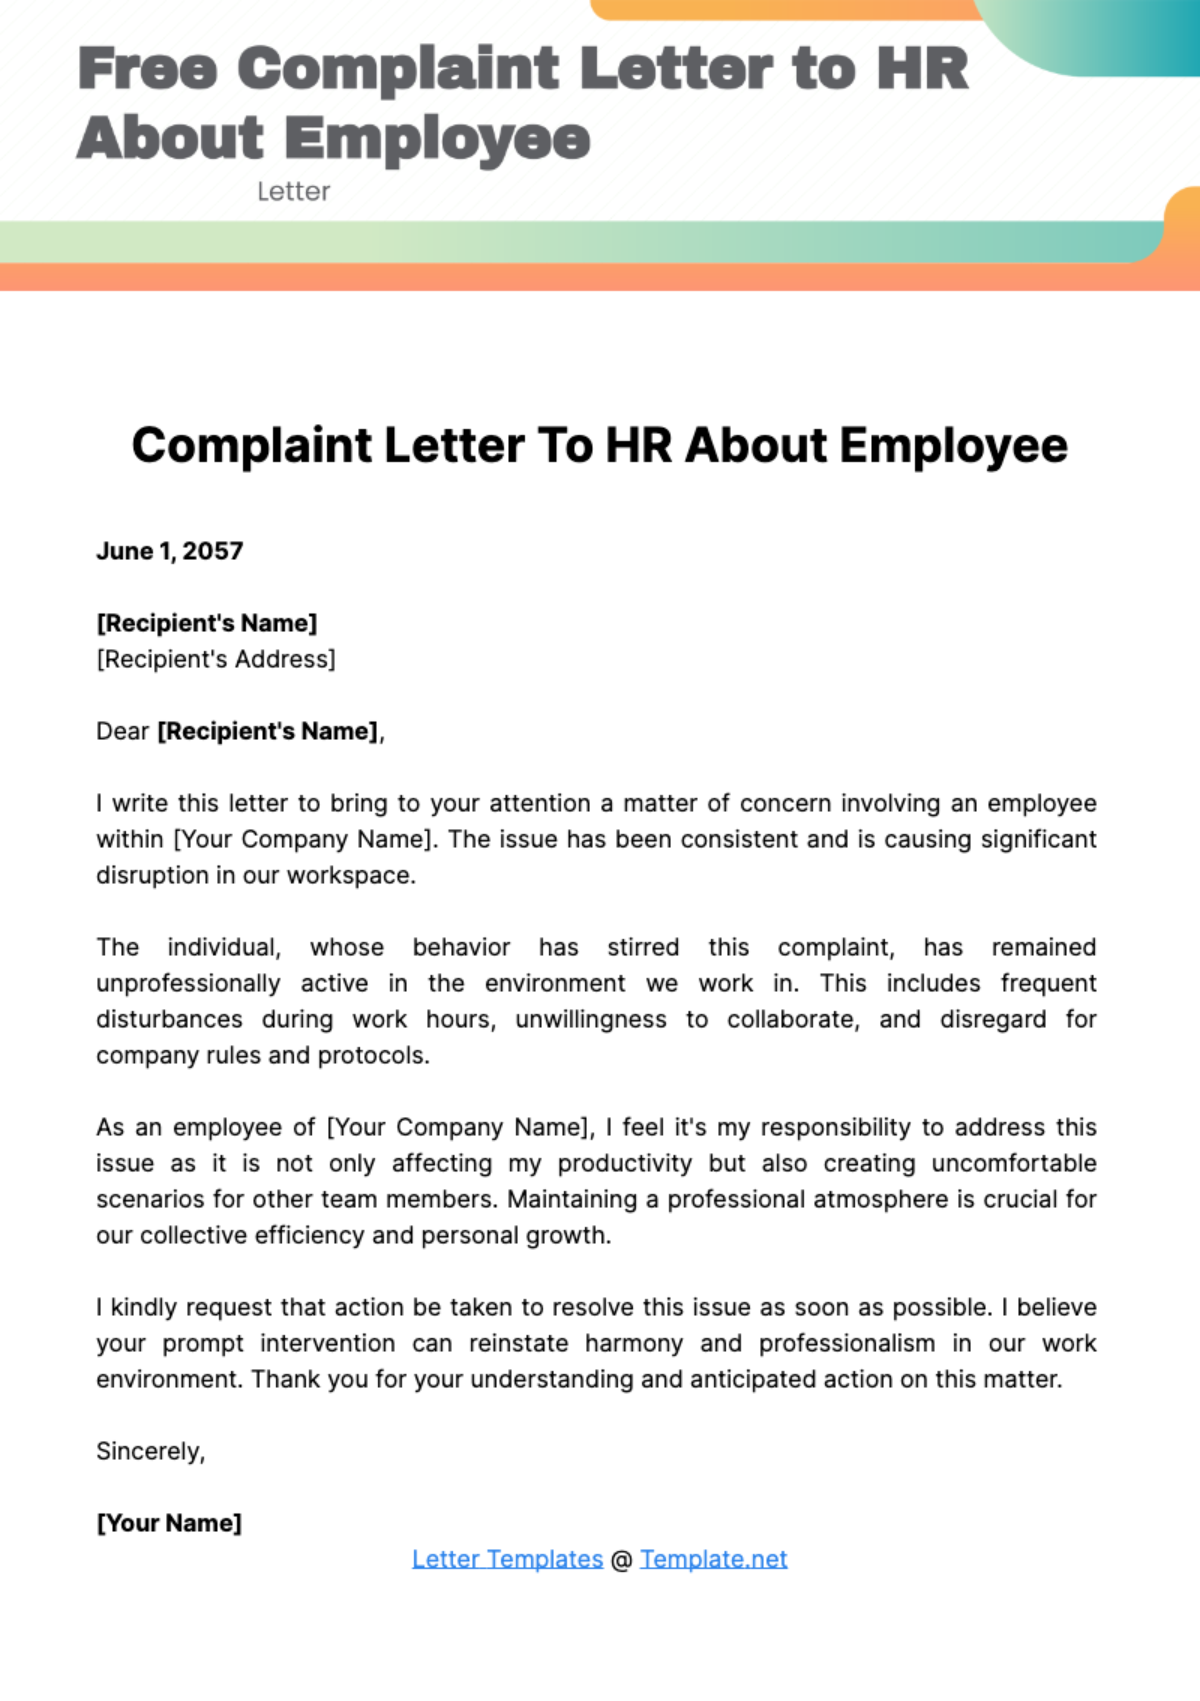 Free Complaint Letter to HR About Employee Template